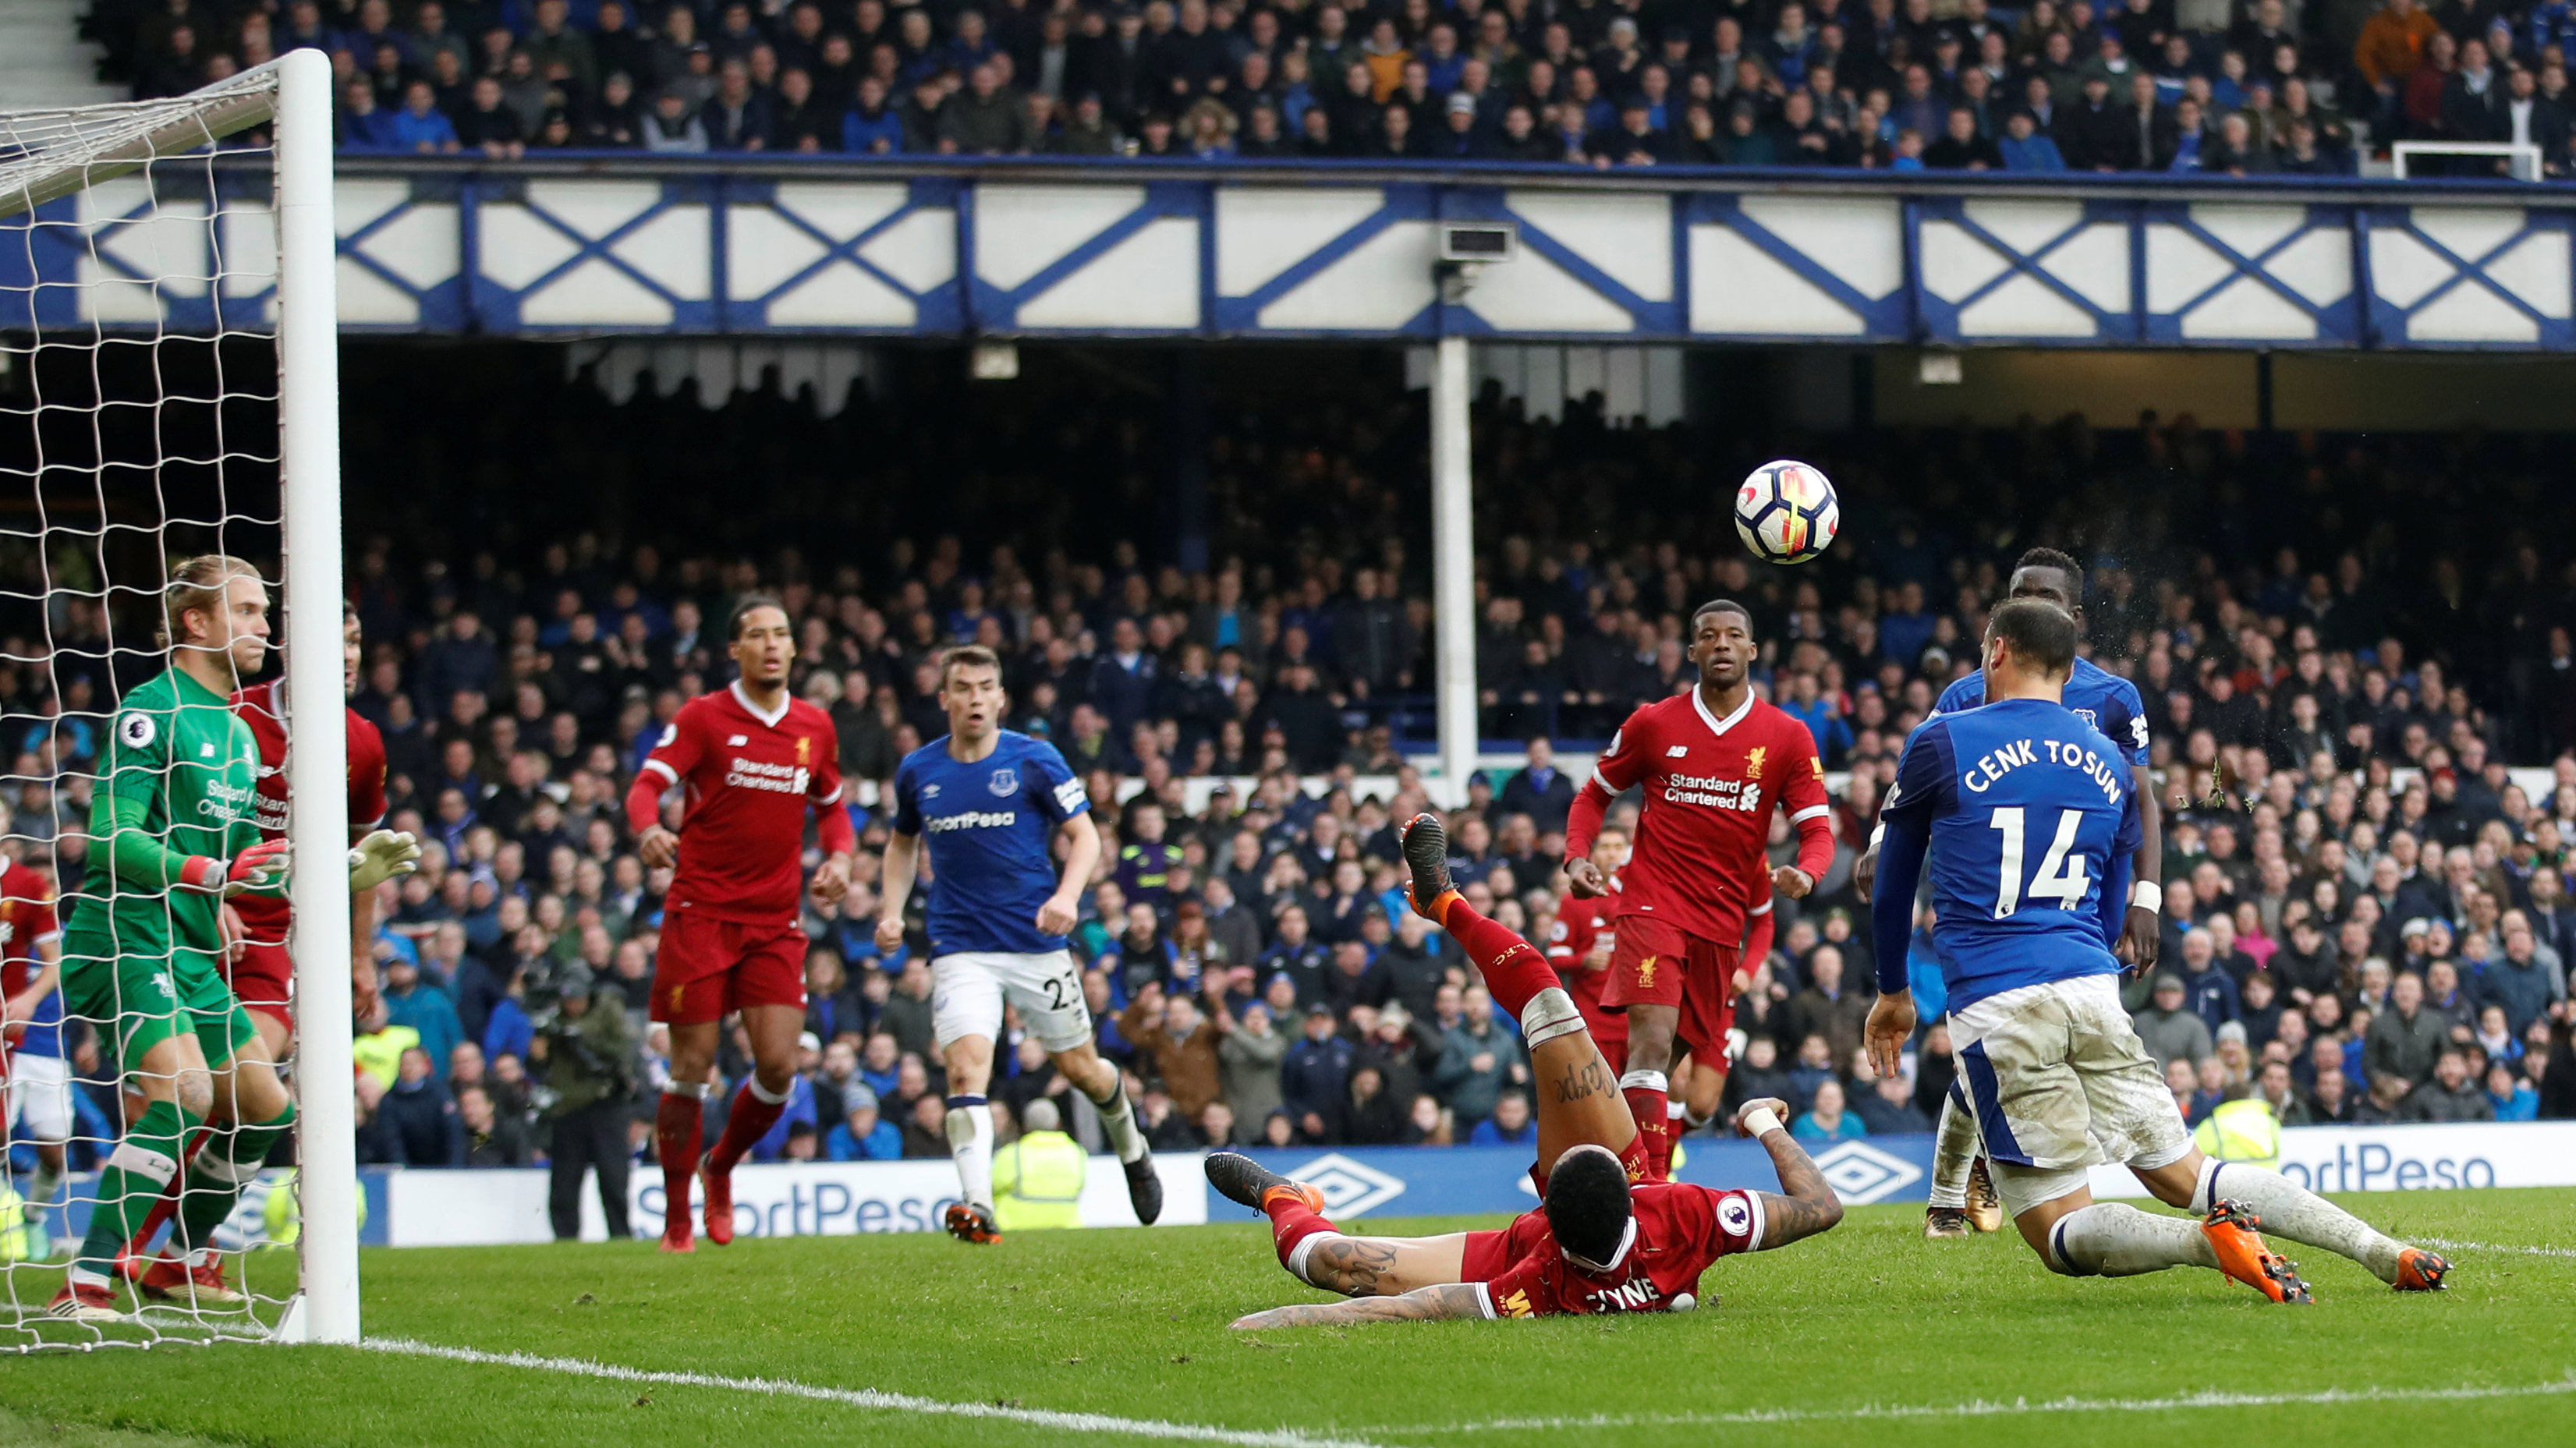 Football: Liverpool hold off late Everton pressure in goalless derby